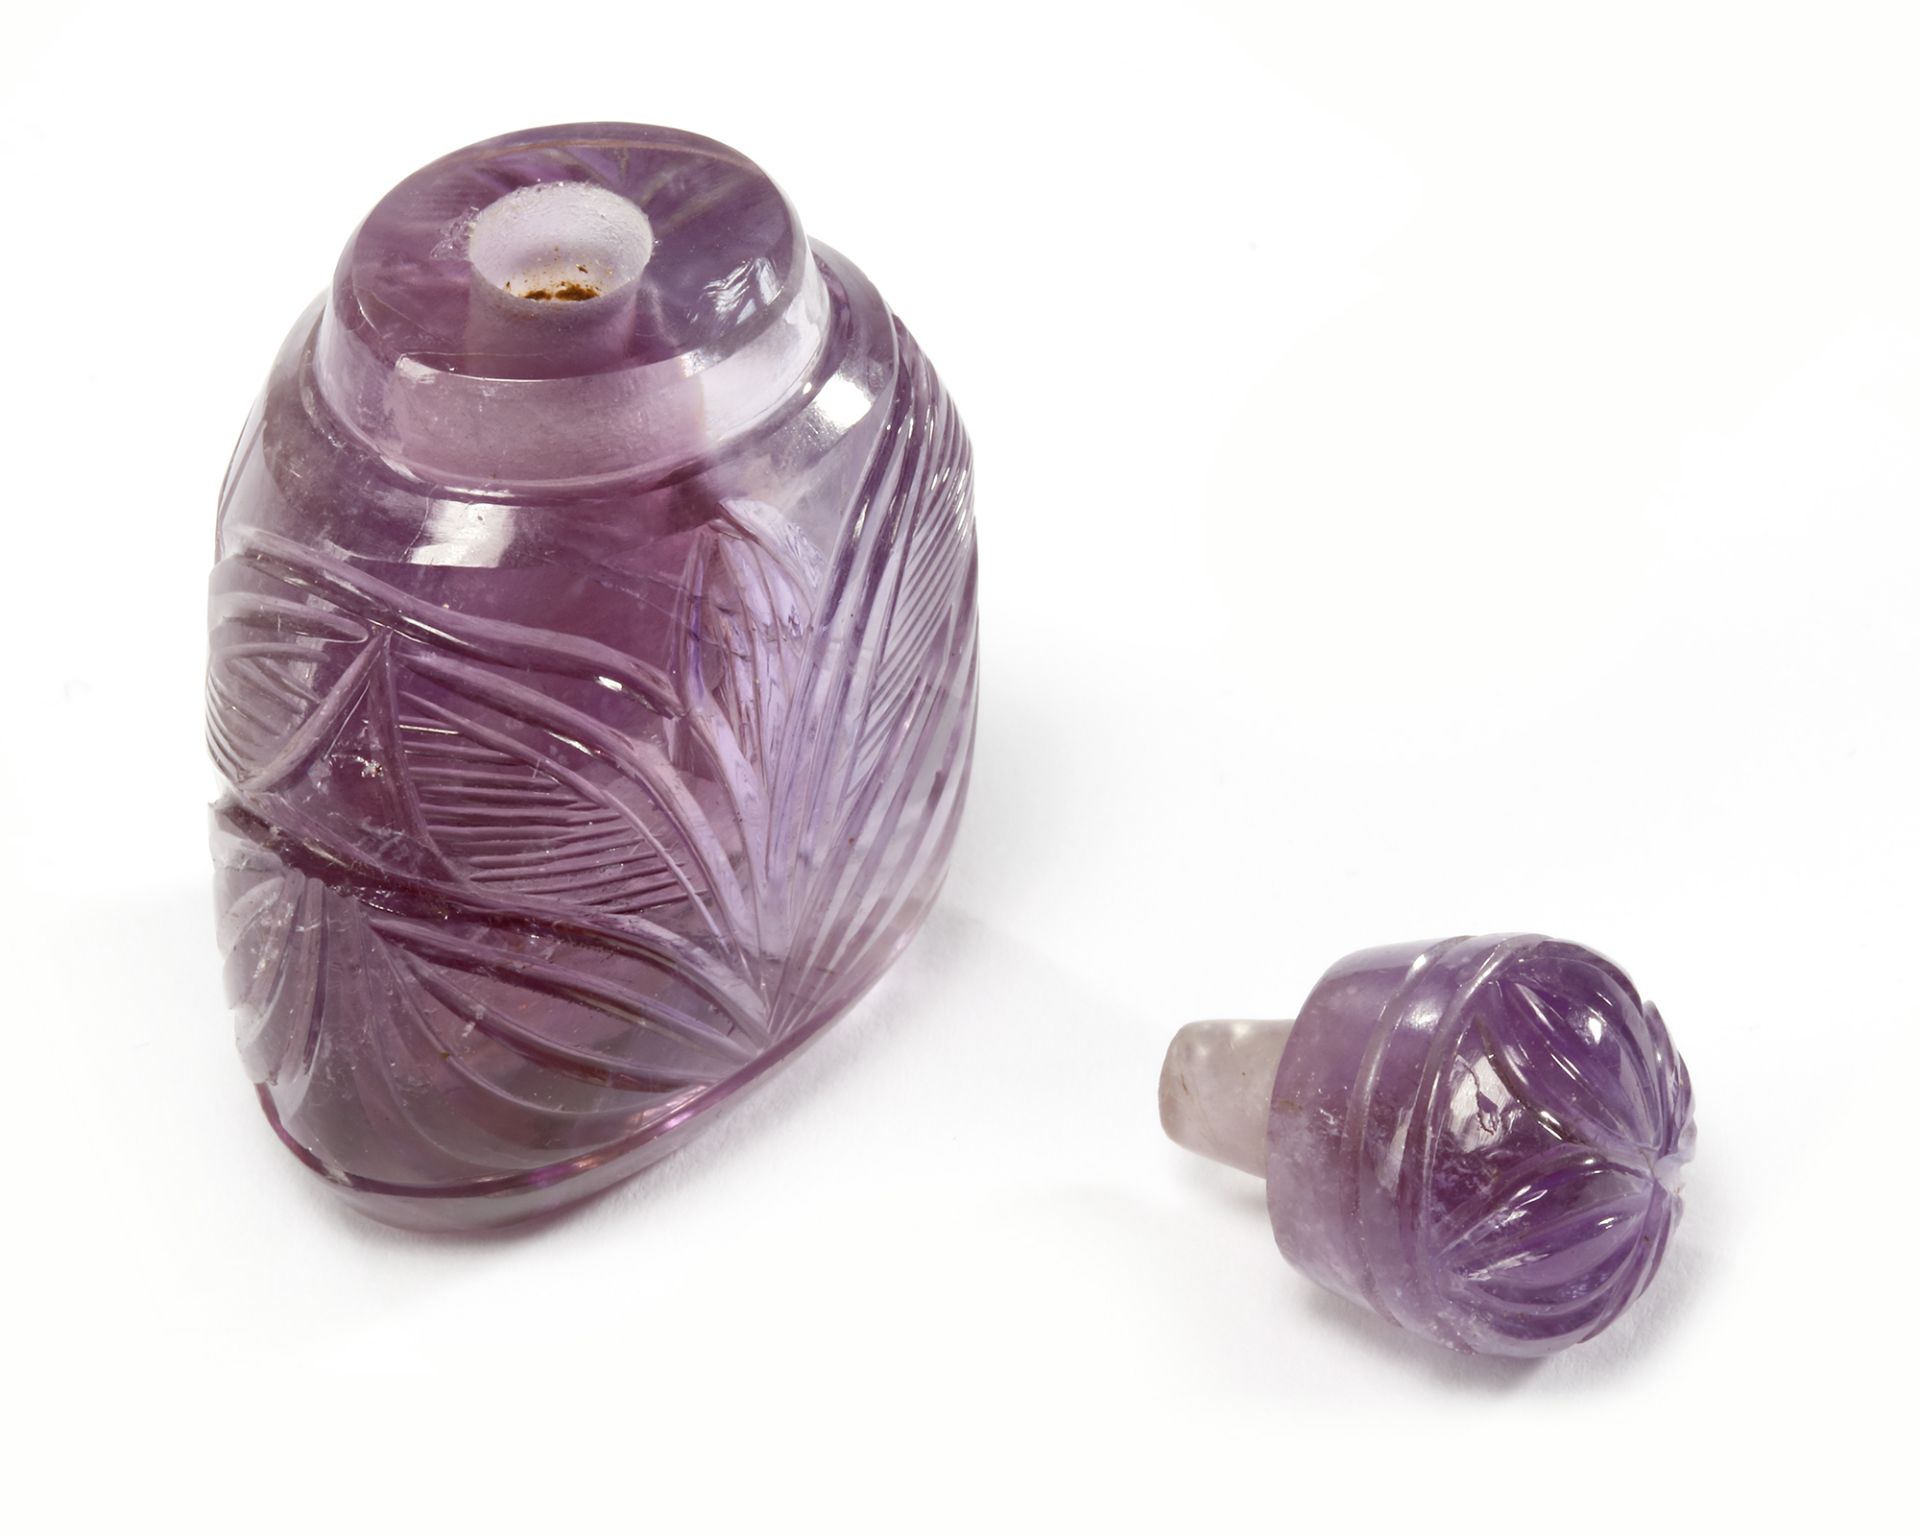 A CARVED AMETHYST FLASK WITH STOPPER, INDIA, LATE 19TH CENTURY - Image 2 of 5